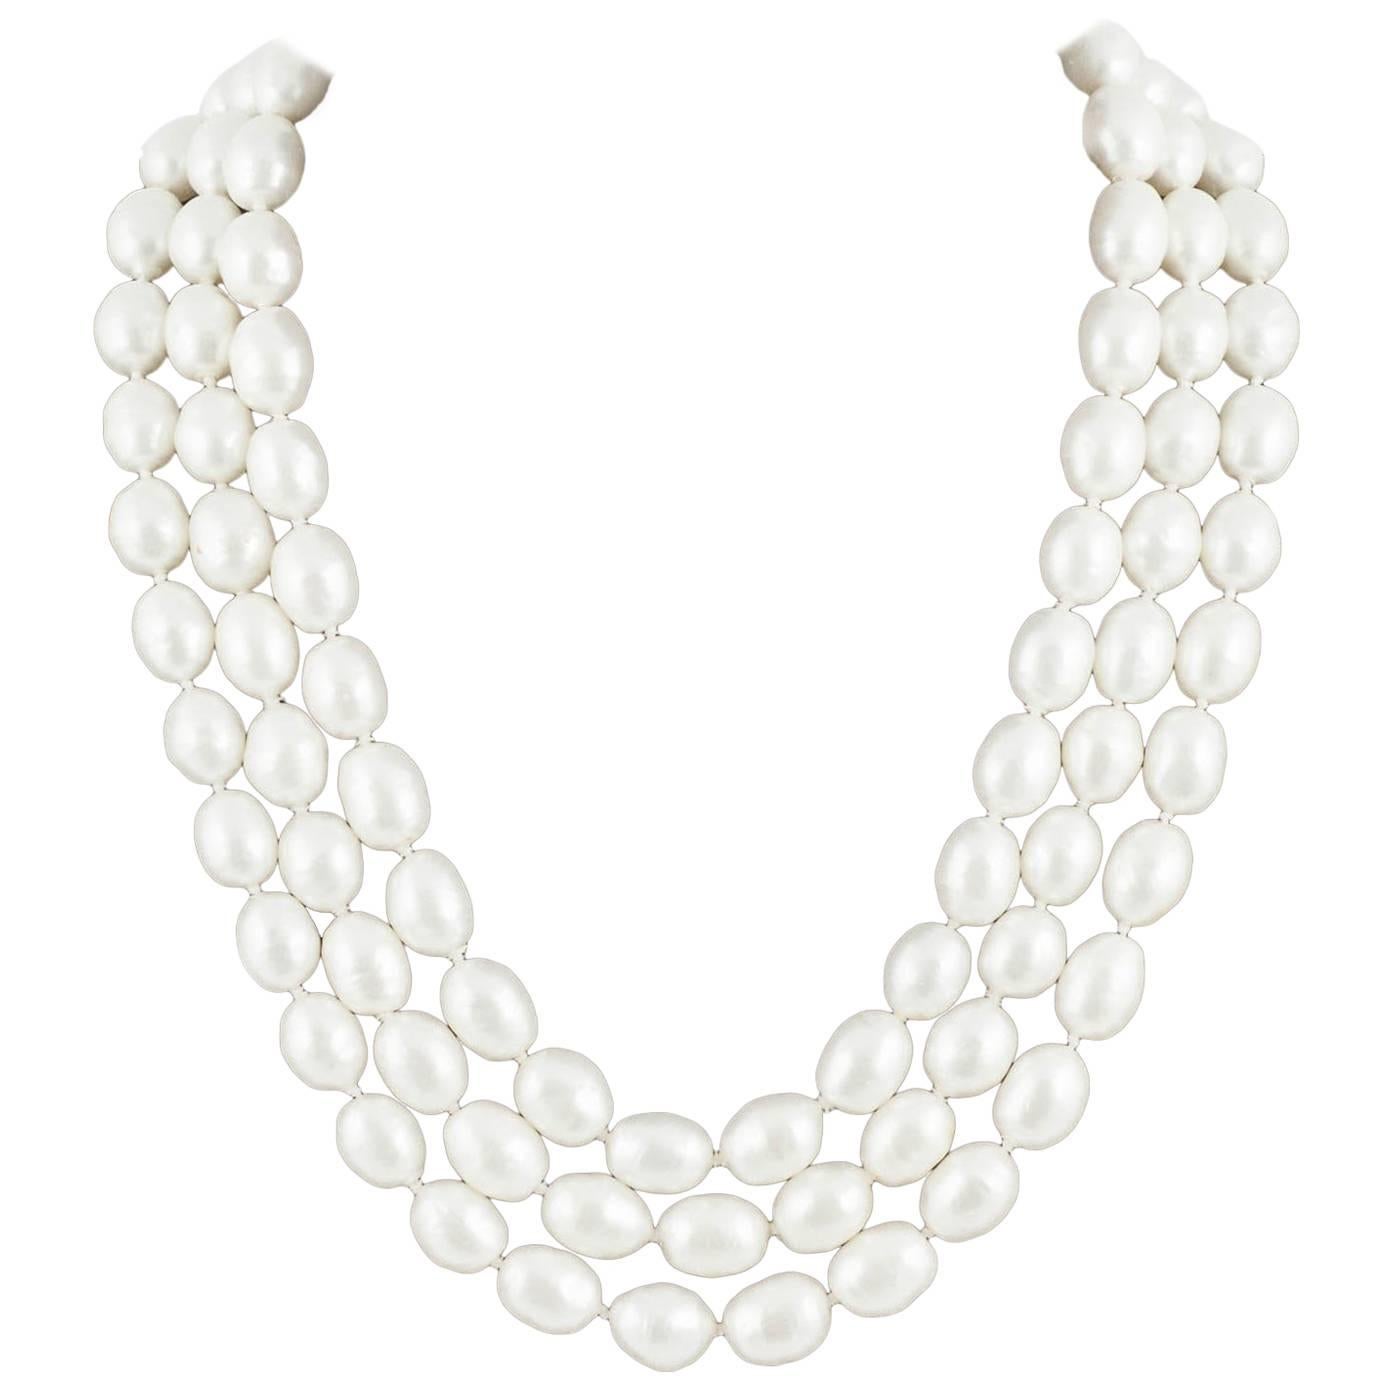 A beautiful three row lustre baroque pearl necklace, Maison Goossens, 1960s